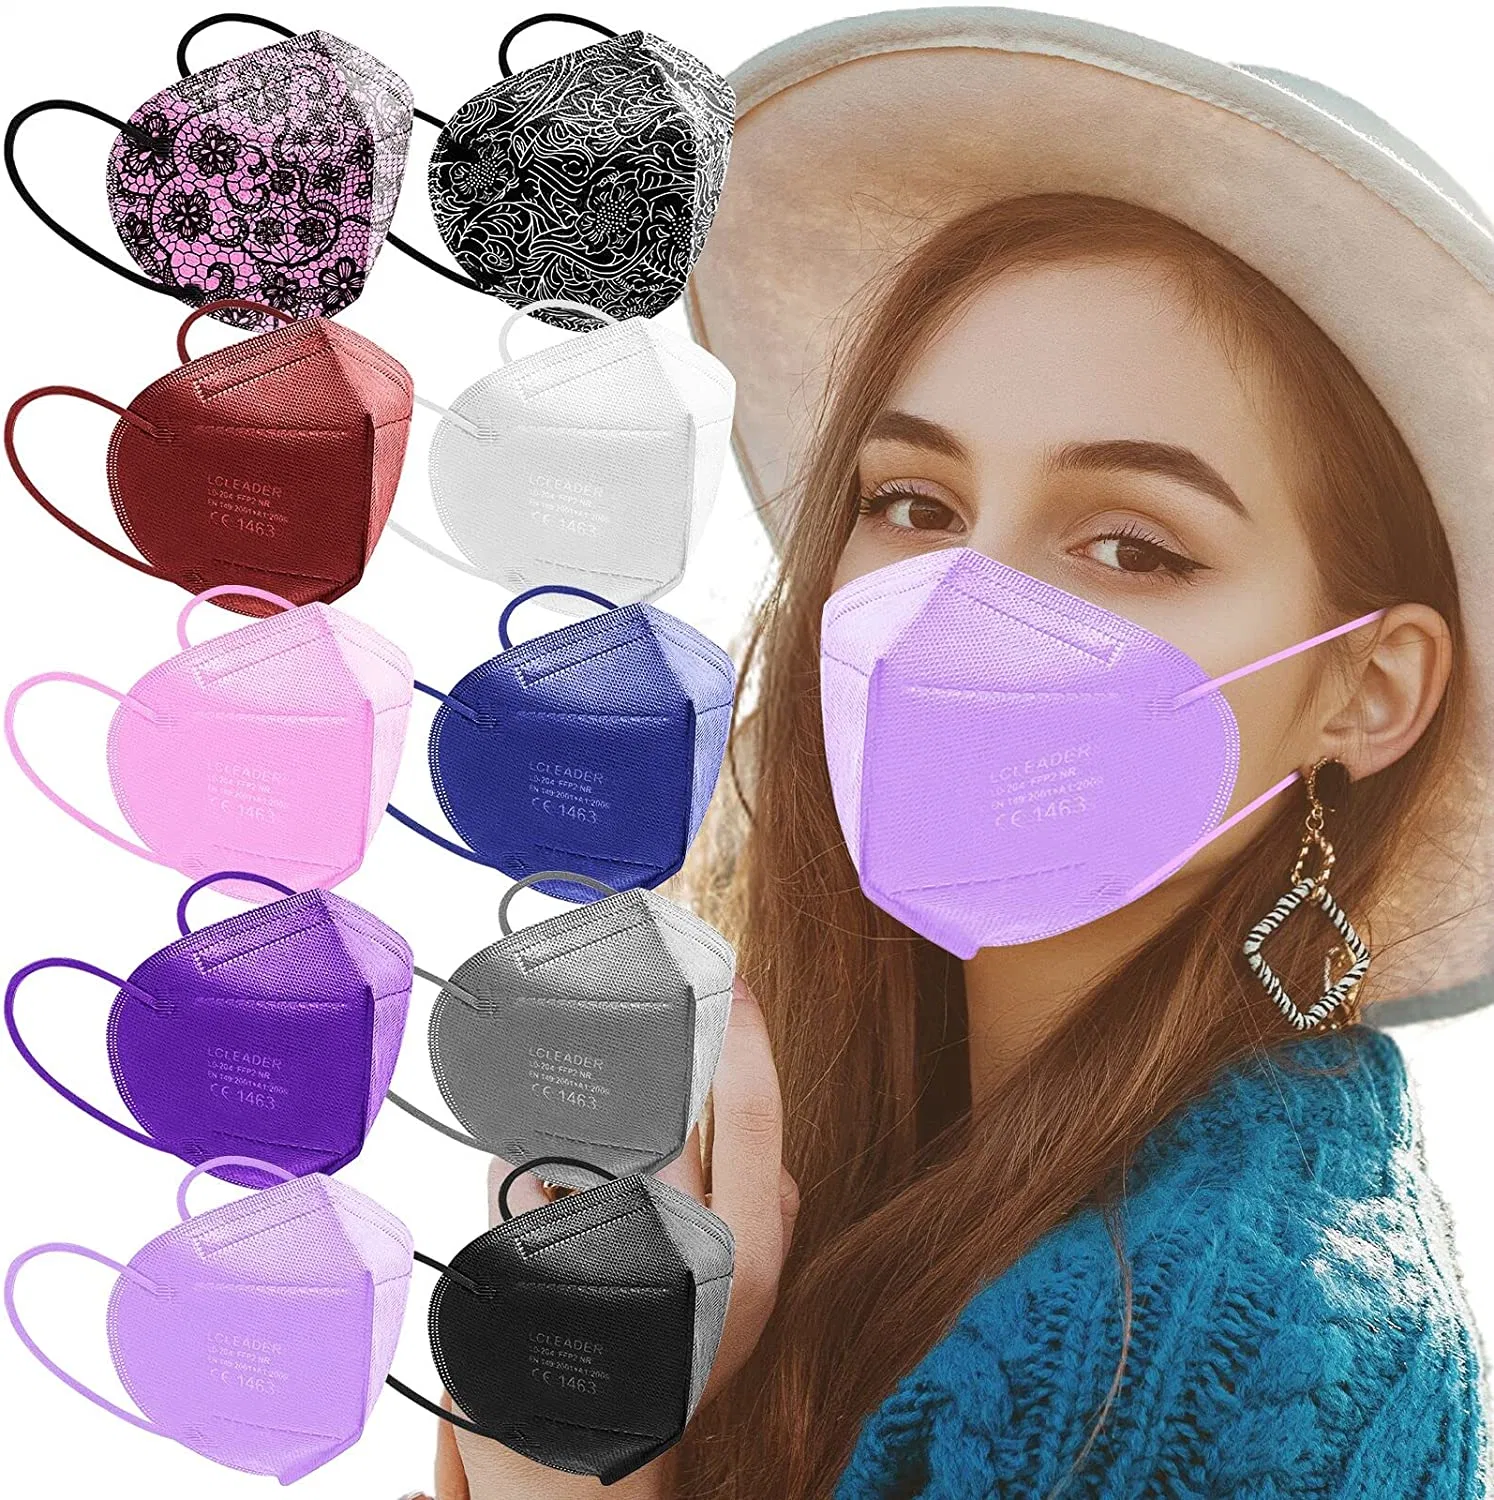 KN95 Mask Cup Dust Safety Face Masks Breathable 5 Layer with Elastic Ear Loop and Nose Bridge Clip for Adult Men & Women